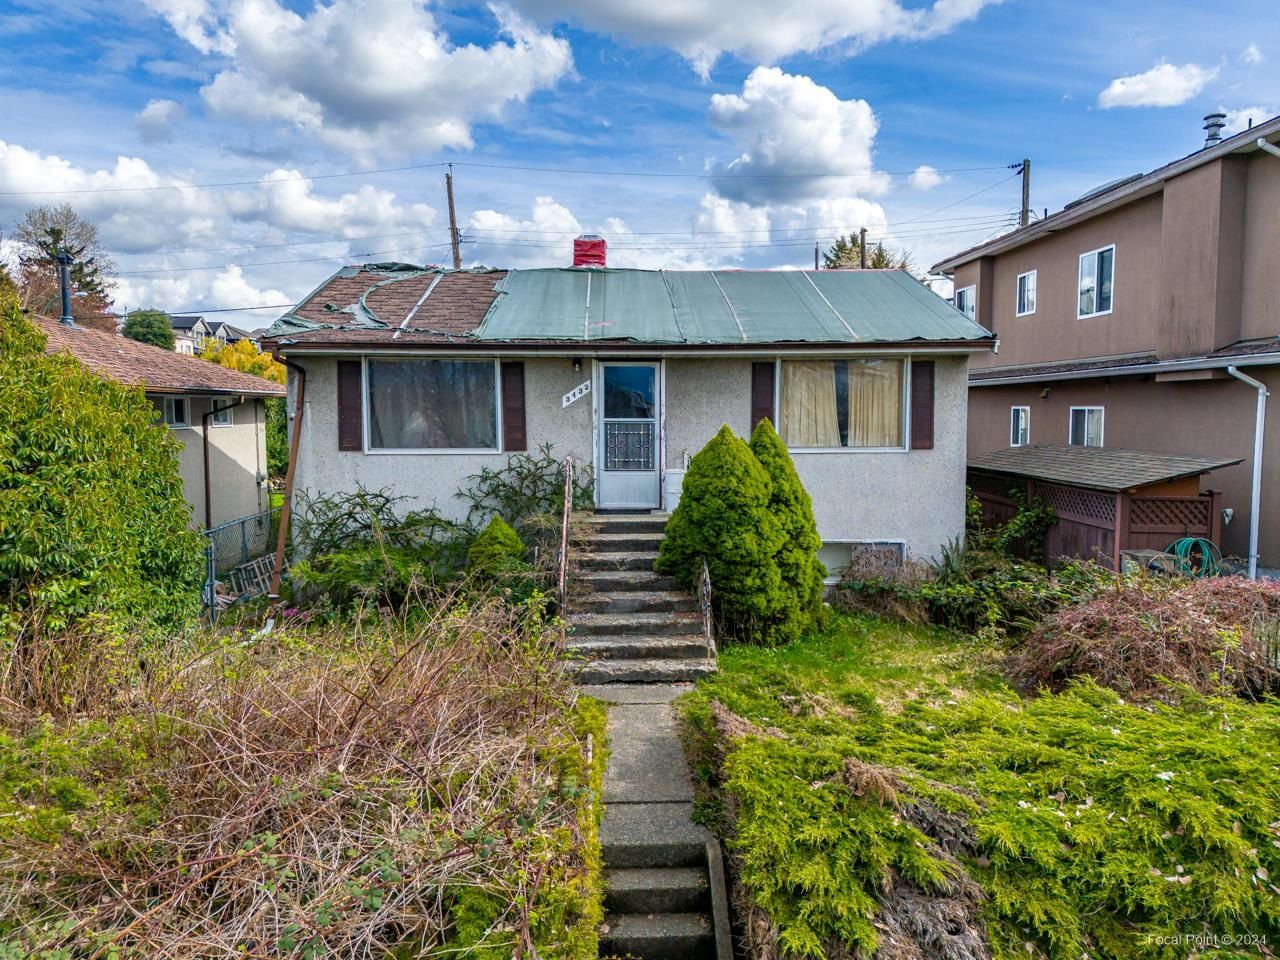 This property has sold: 3432 MONS DR in Vancouver